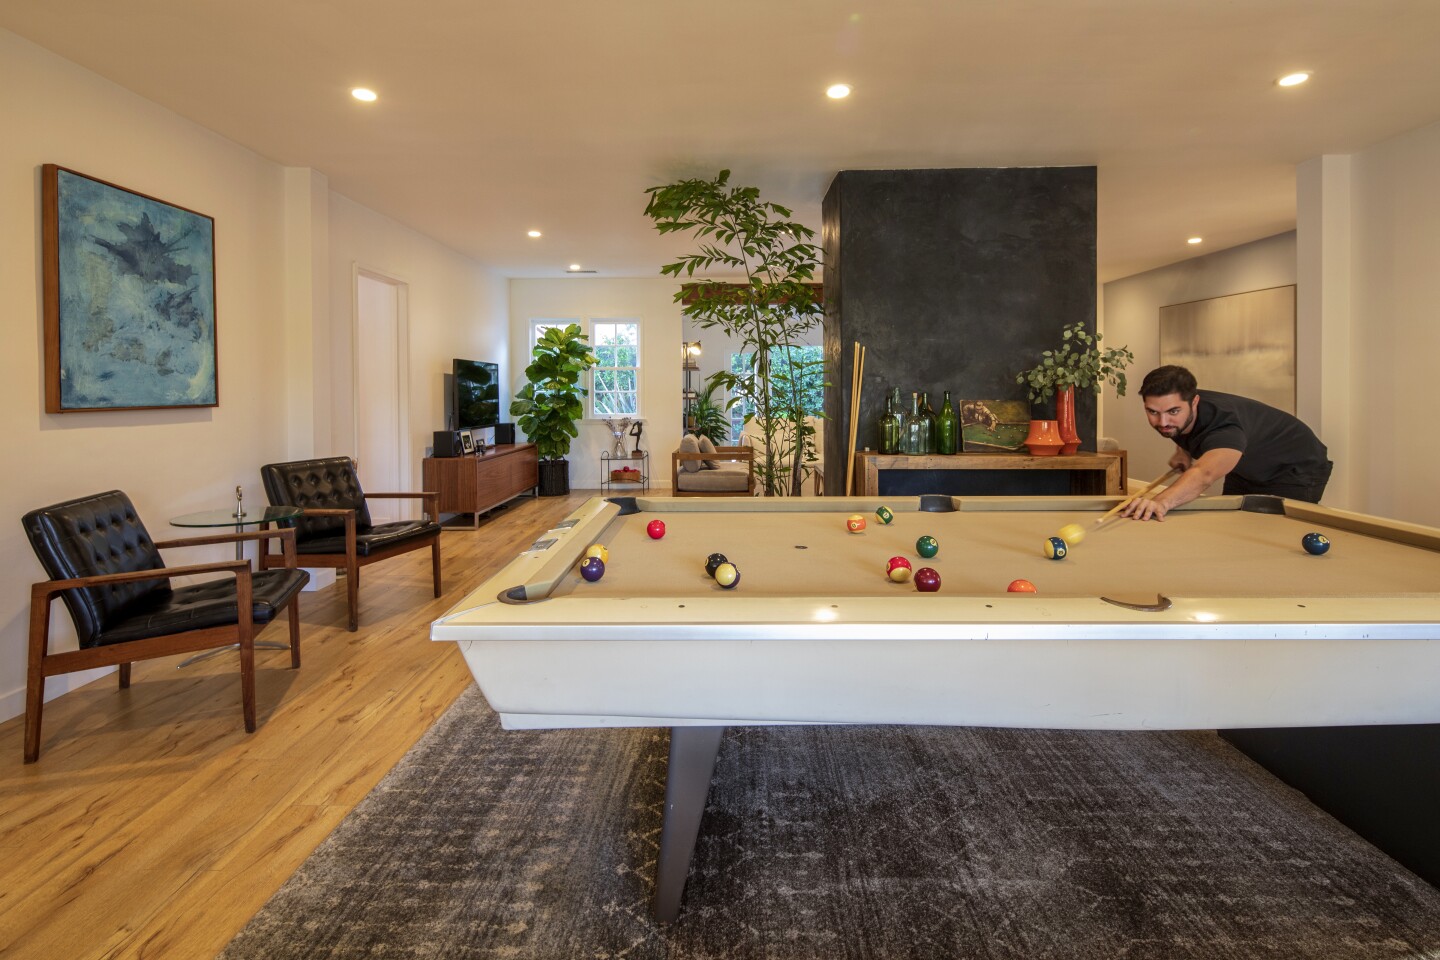 In Sam Leiaghat's family-friendly Studio City neighborhood, passers-by have no clue that behind the postwar façade of his 1941 Ranch lies a surprisingly sleek and sunny bachelor pad – complete with a Brunswick pool table in the living room.